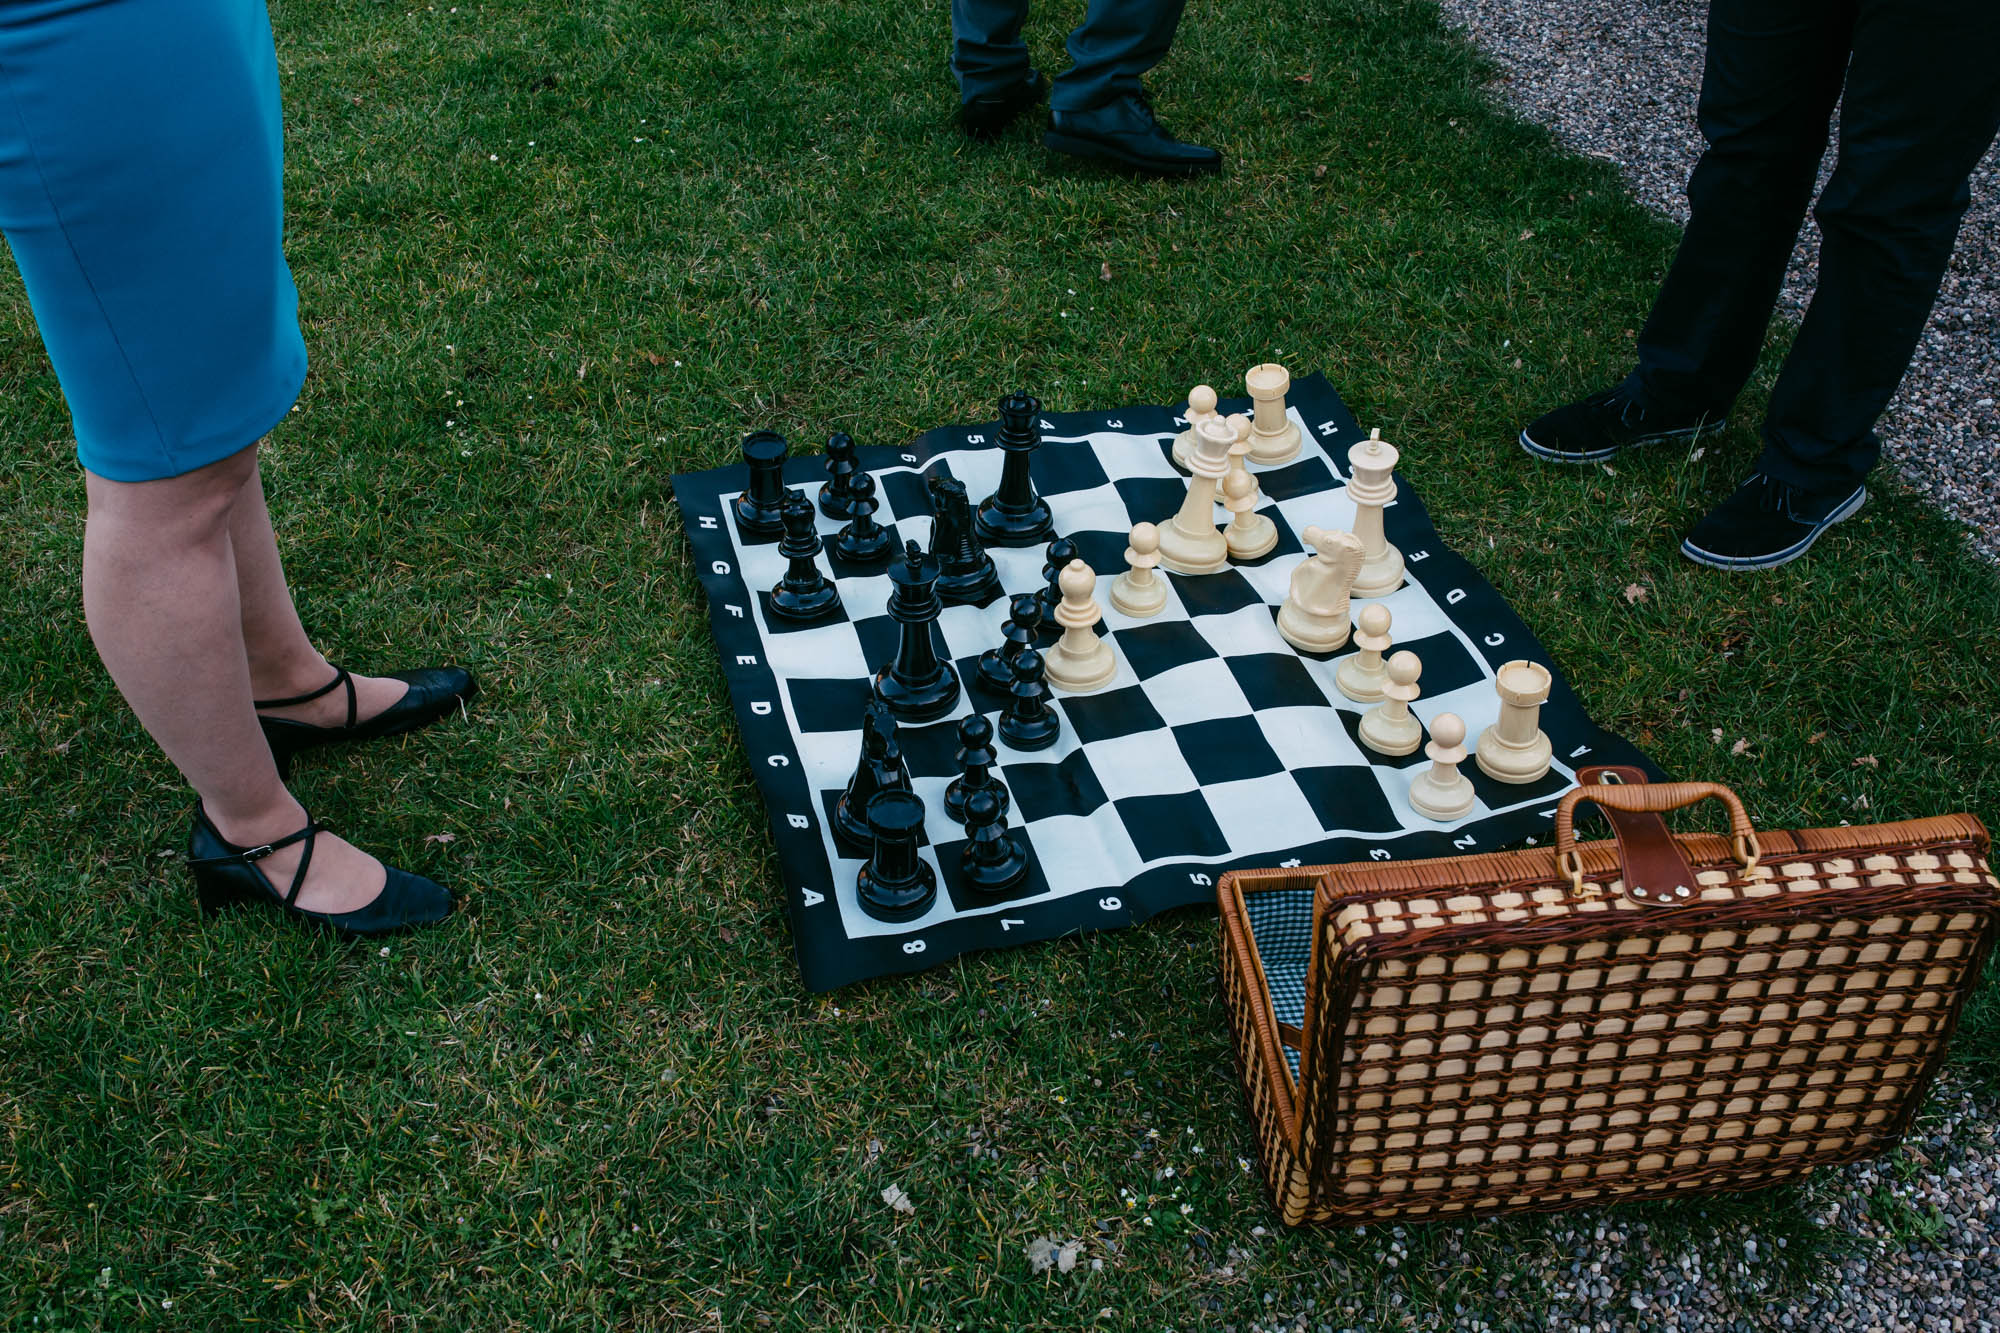 A group of people play chess on the grass during a wedding.